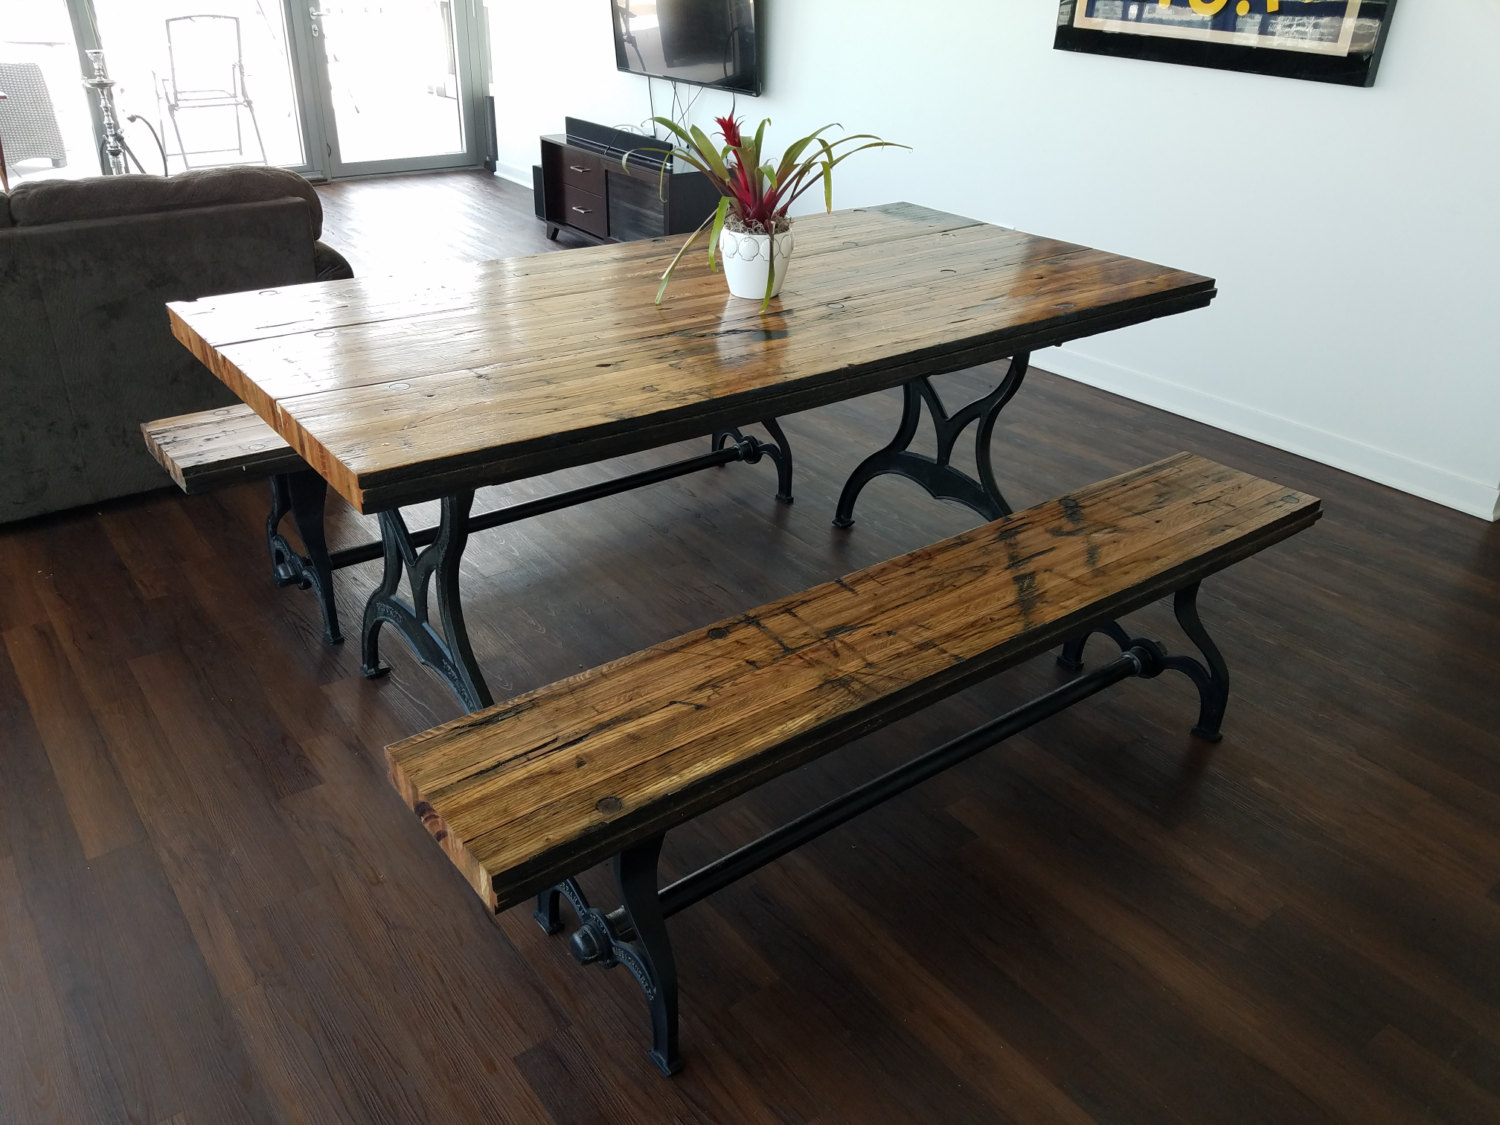 antique kitchen table with bench photo - 3